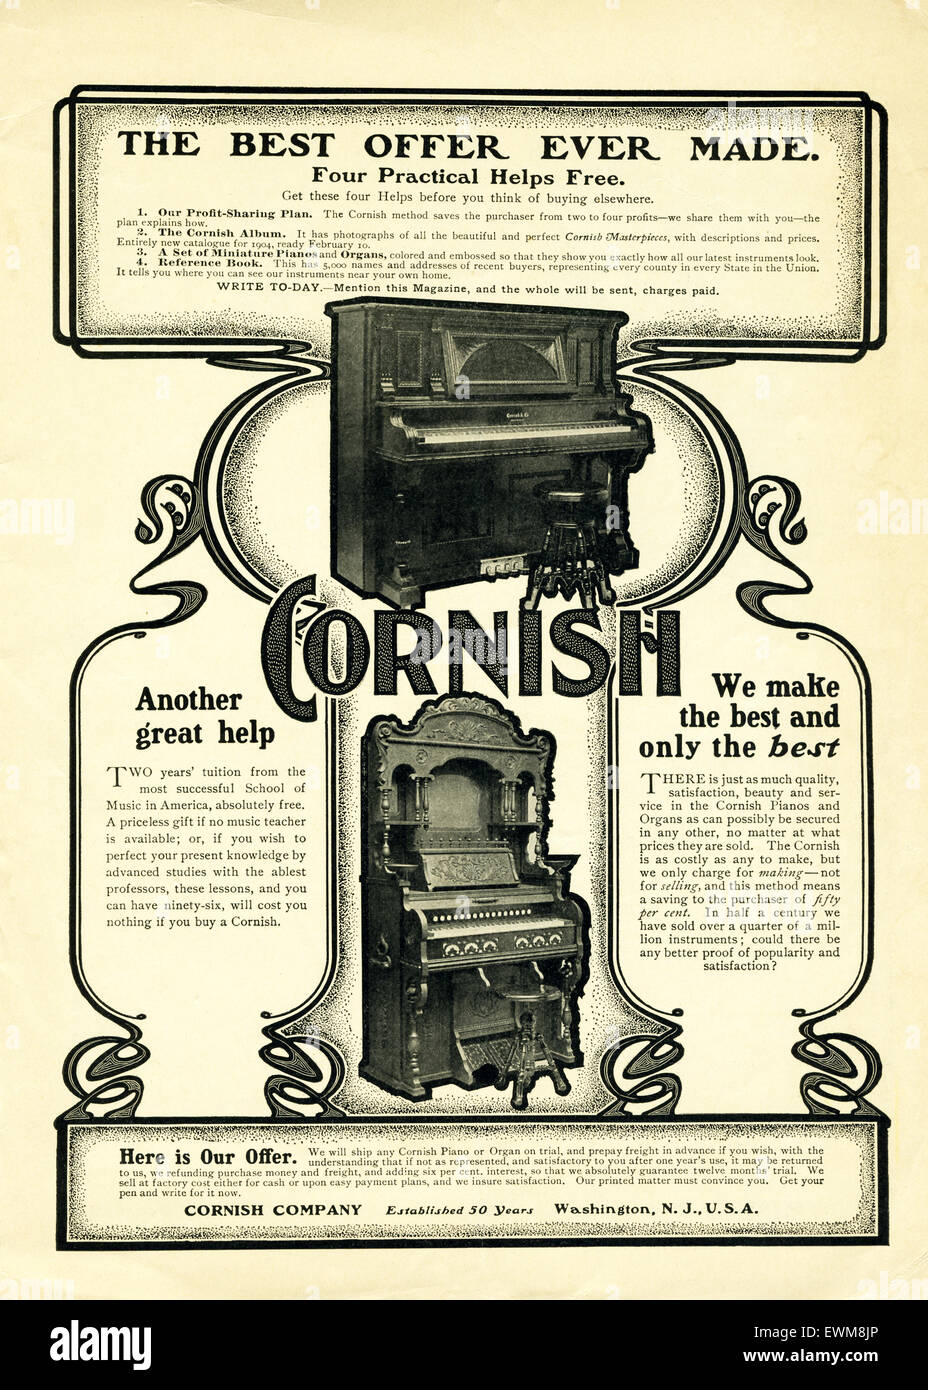 This ad for Cornish upright pianos appeared in McCall’s Magazine March 1904. According to Antique Piano Shop, The Cornish Piano & Organ company was established in Washington, New Jersey in 1879. The Cornish Piano & Organ Company was a huge mail order house, selling their organs and pianos directly to the consumer from the factory through elaborate sales catalogs, advertisements, and word of mouth. Stock Photo